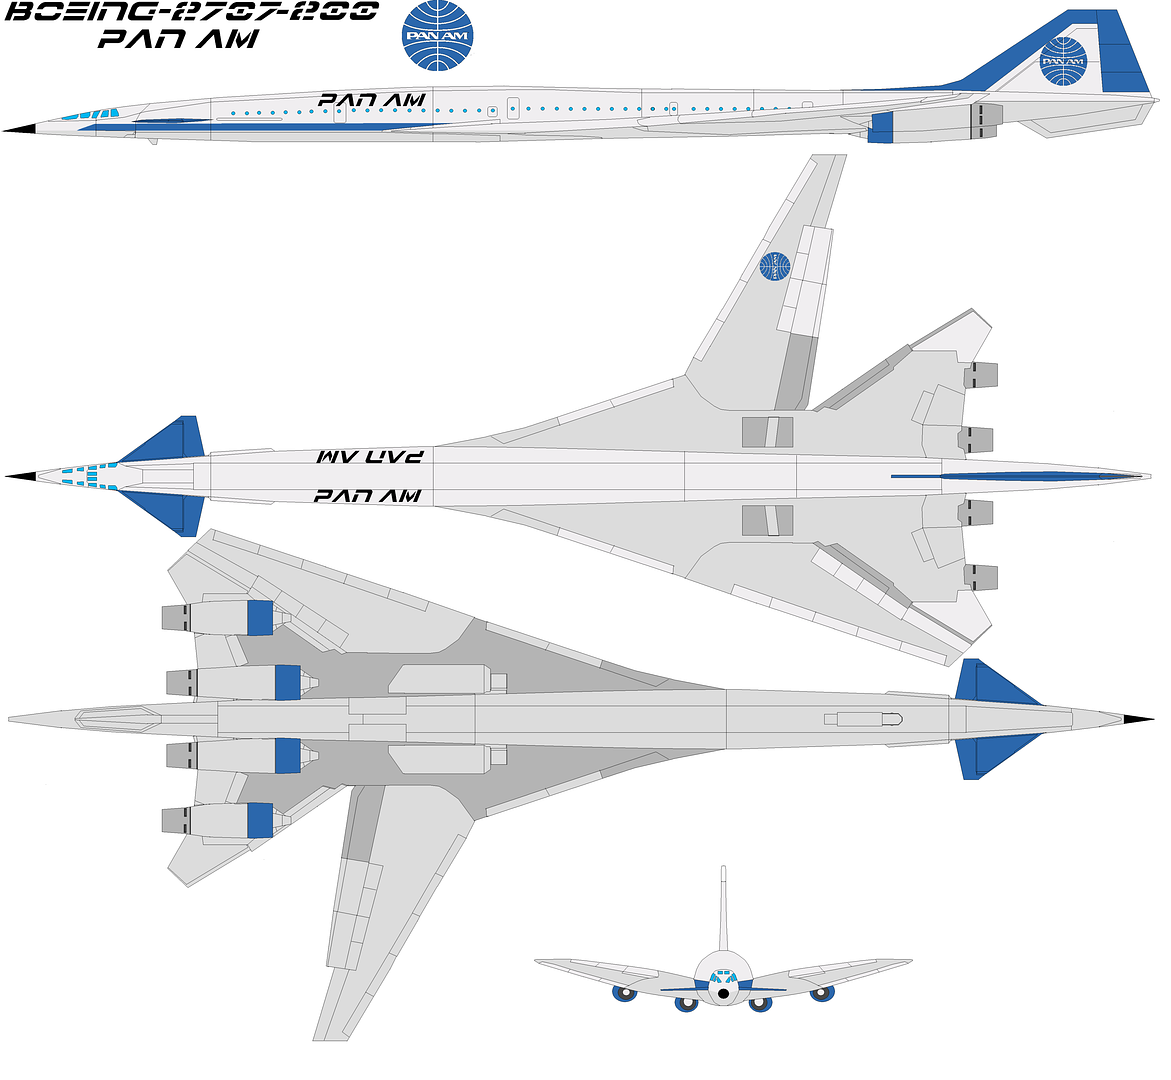 Boeing-2707-200panam.png